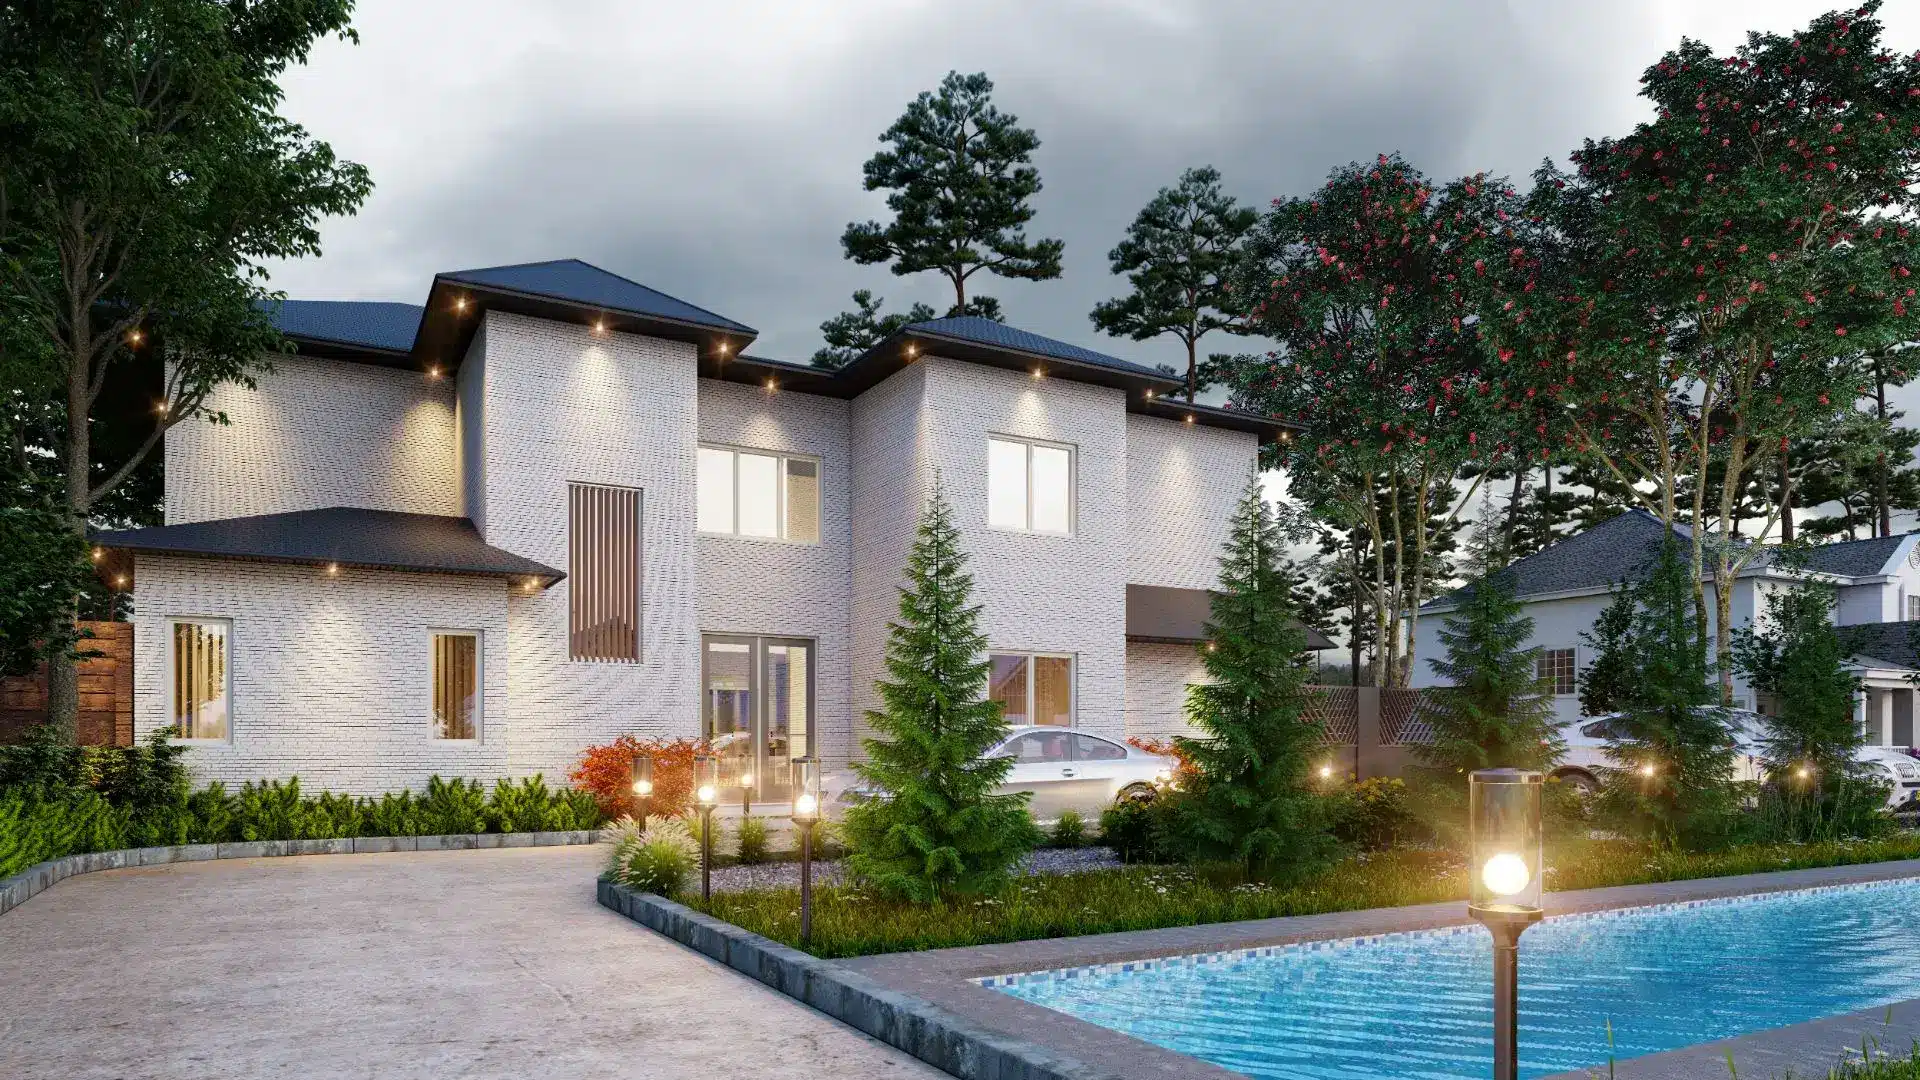 11 Benefits of 3D Exterior Visualizations for Architects & Real Estate